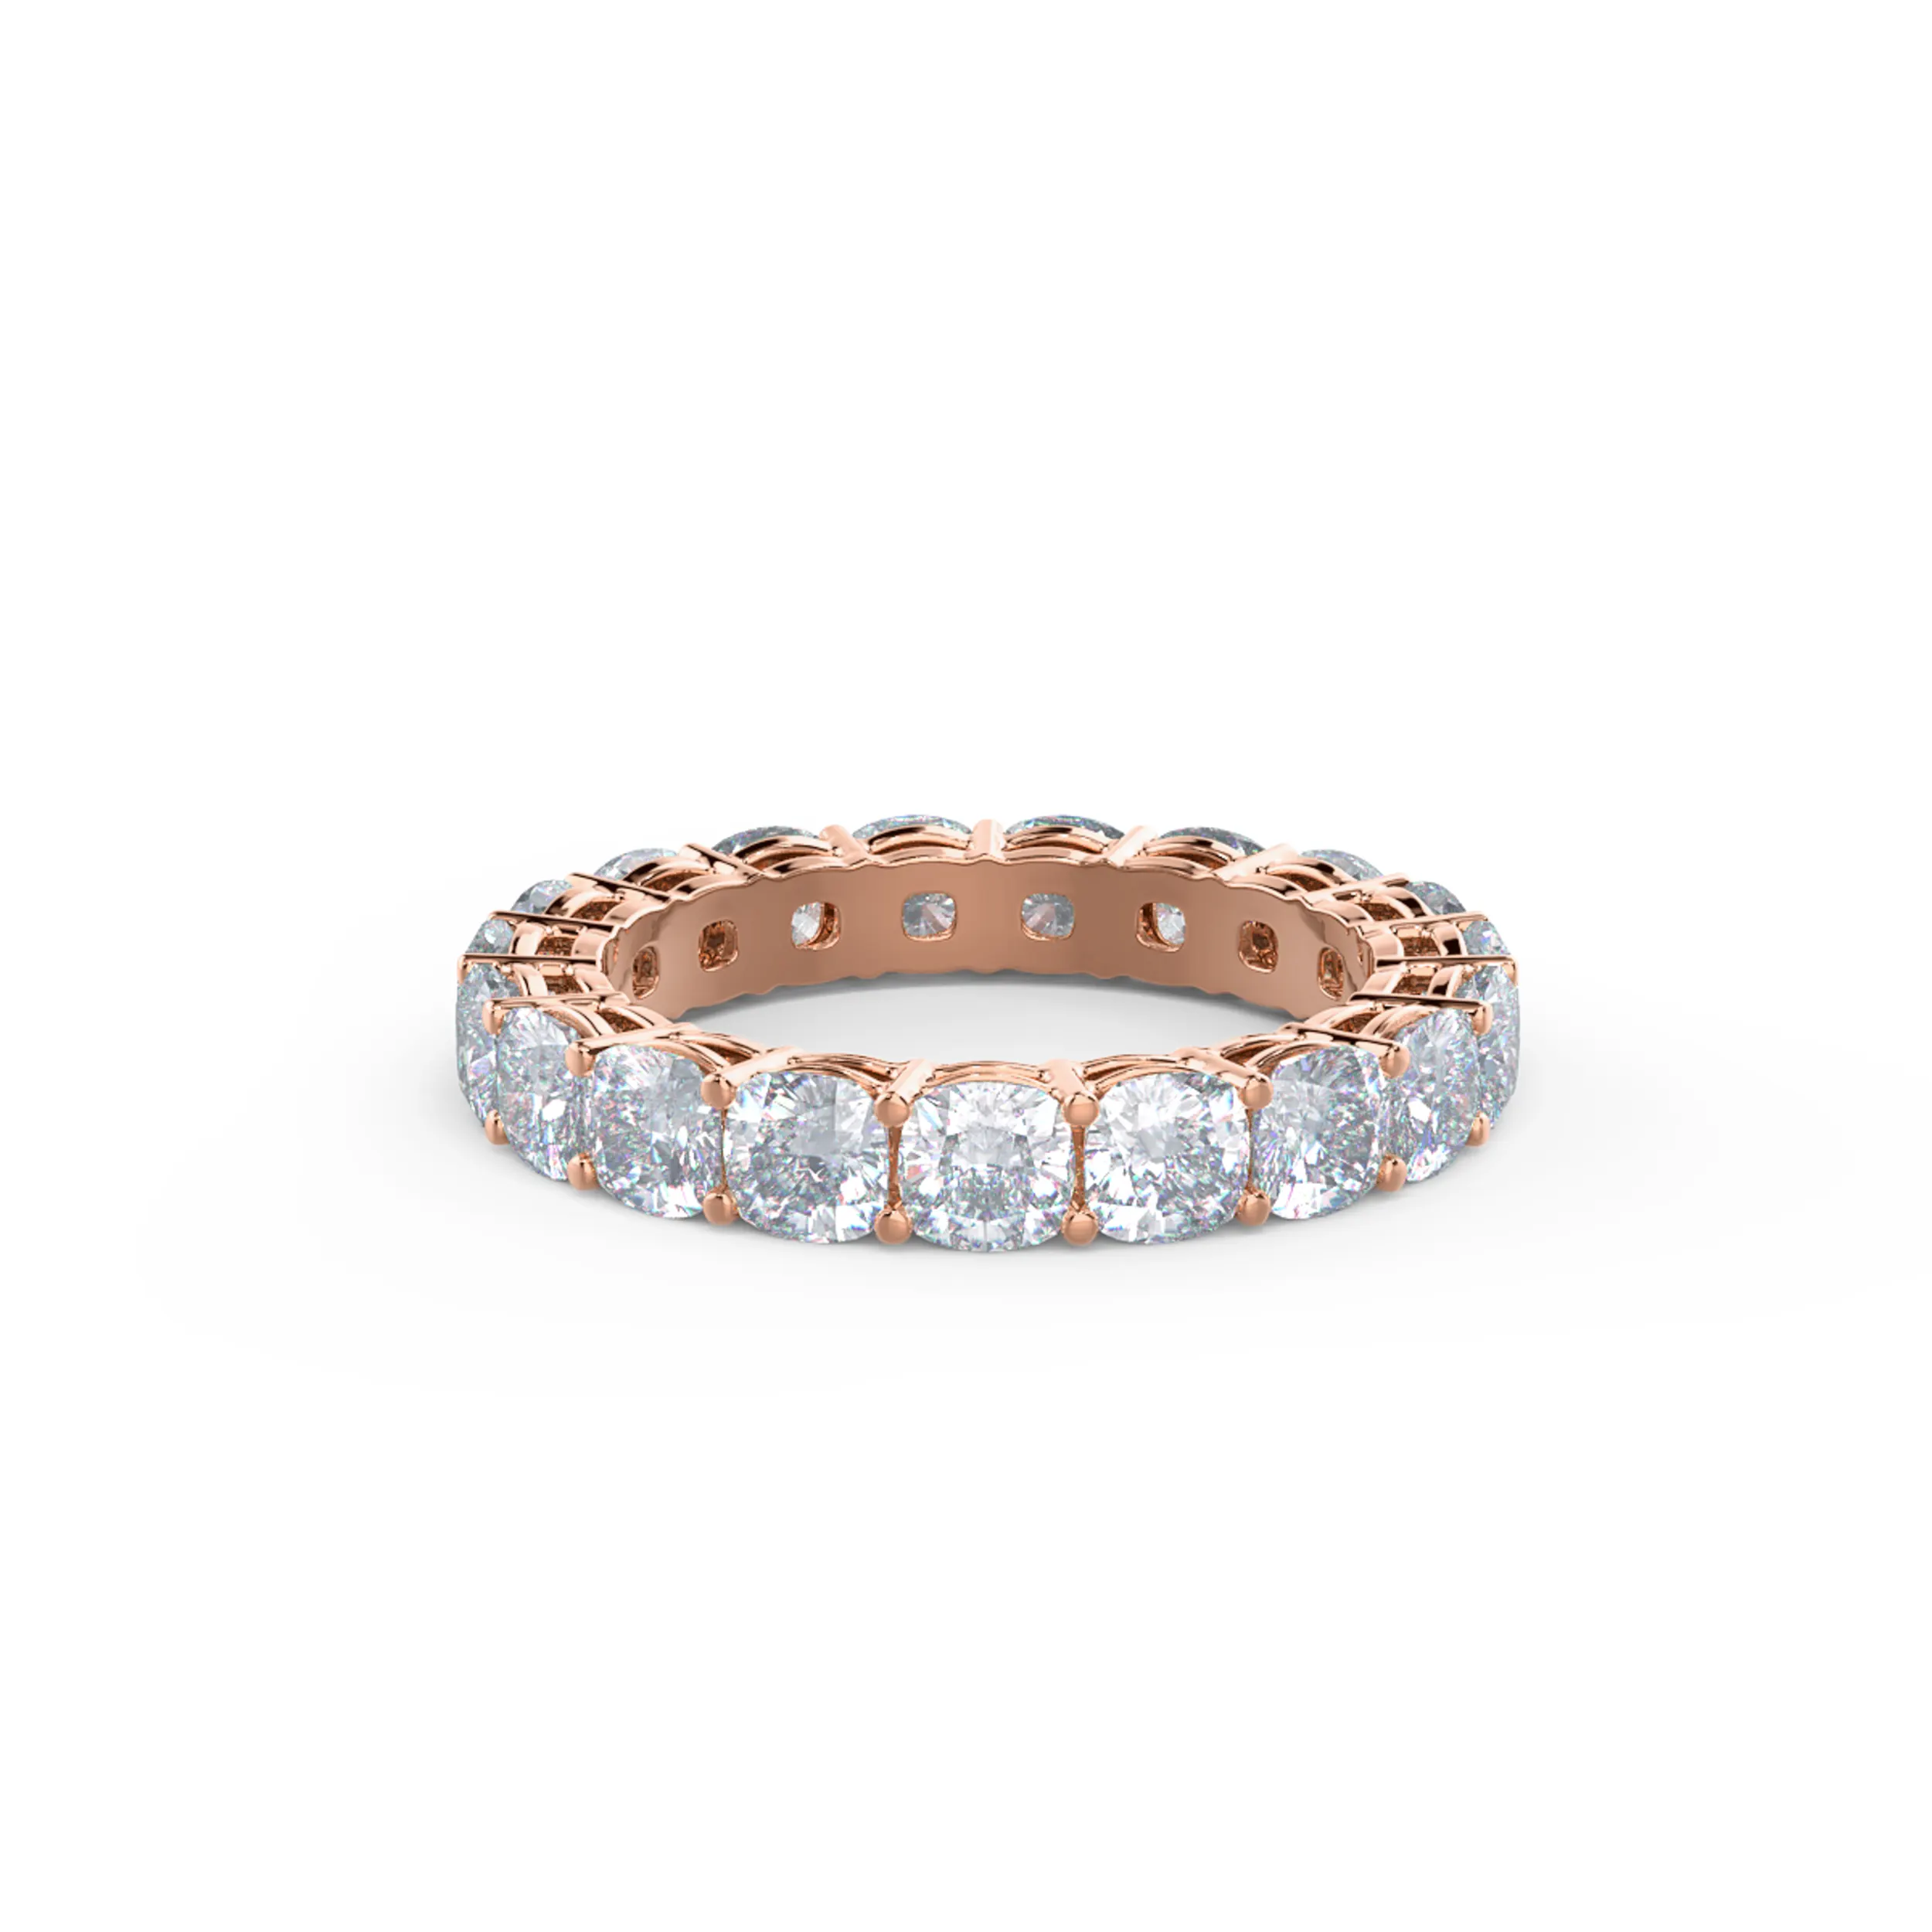 Exceptional Quality 4.75 ct Lab Diamonds Cushion Eternity Band in Rose Gold (Main View)